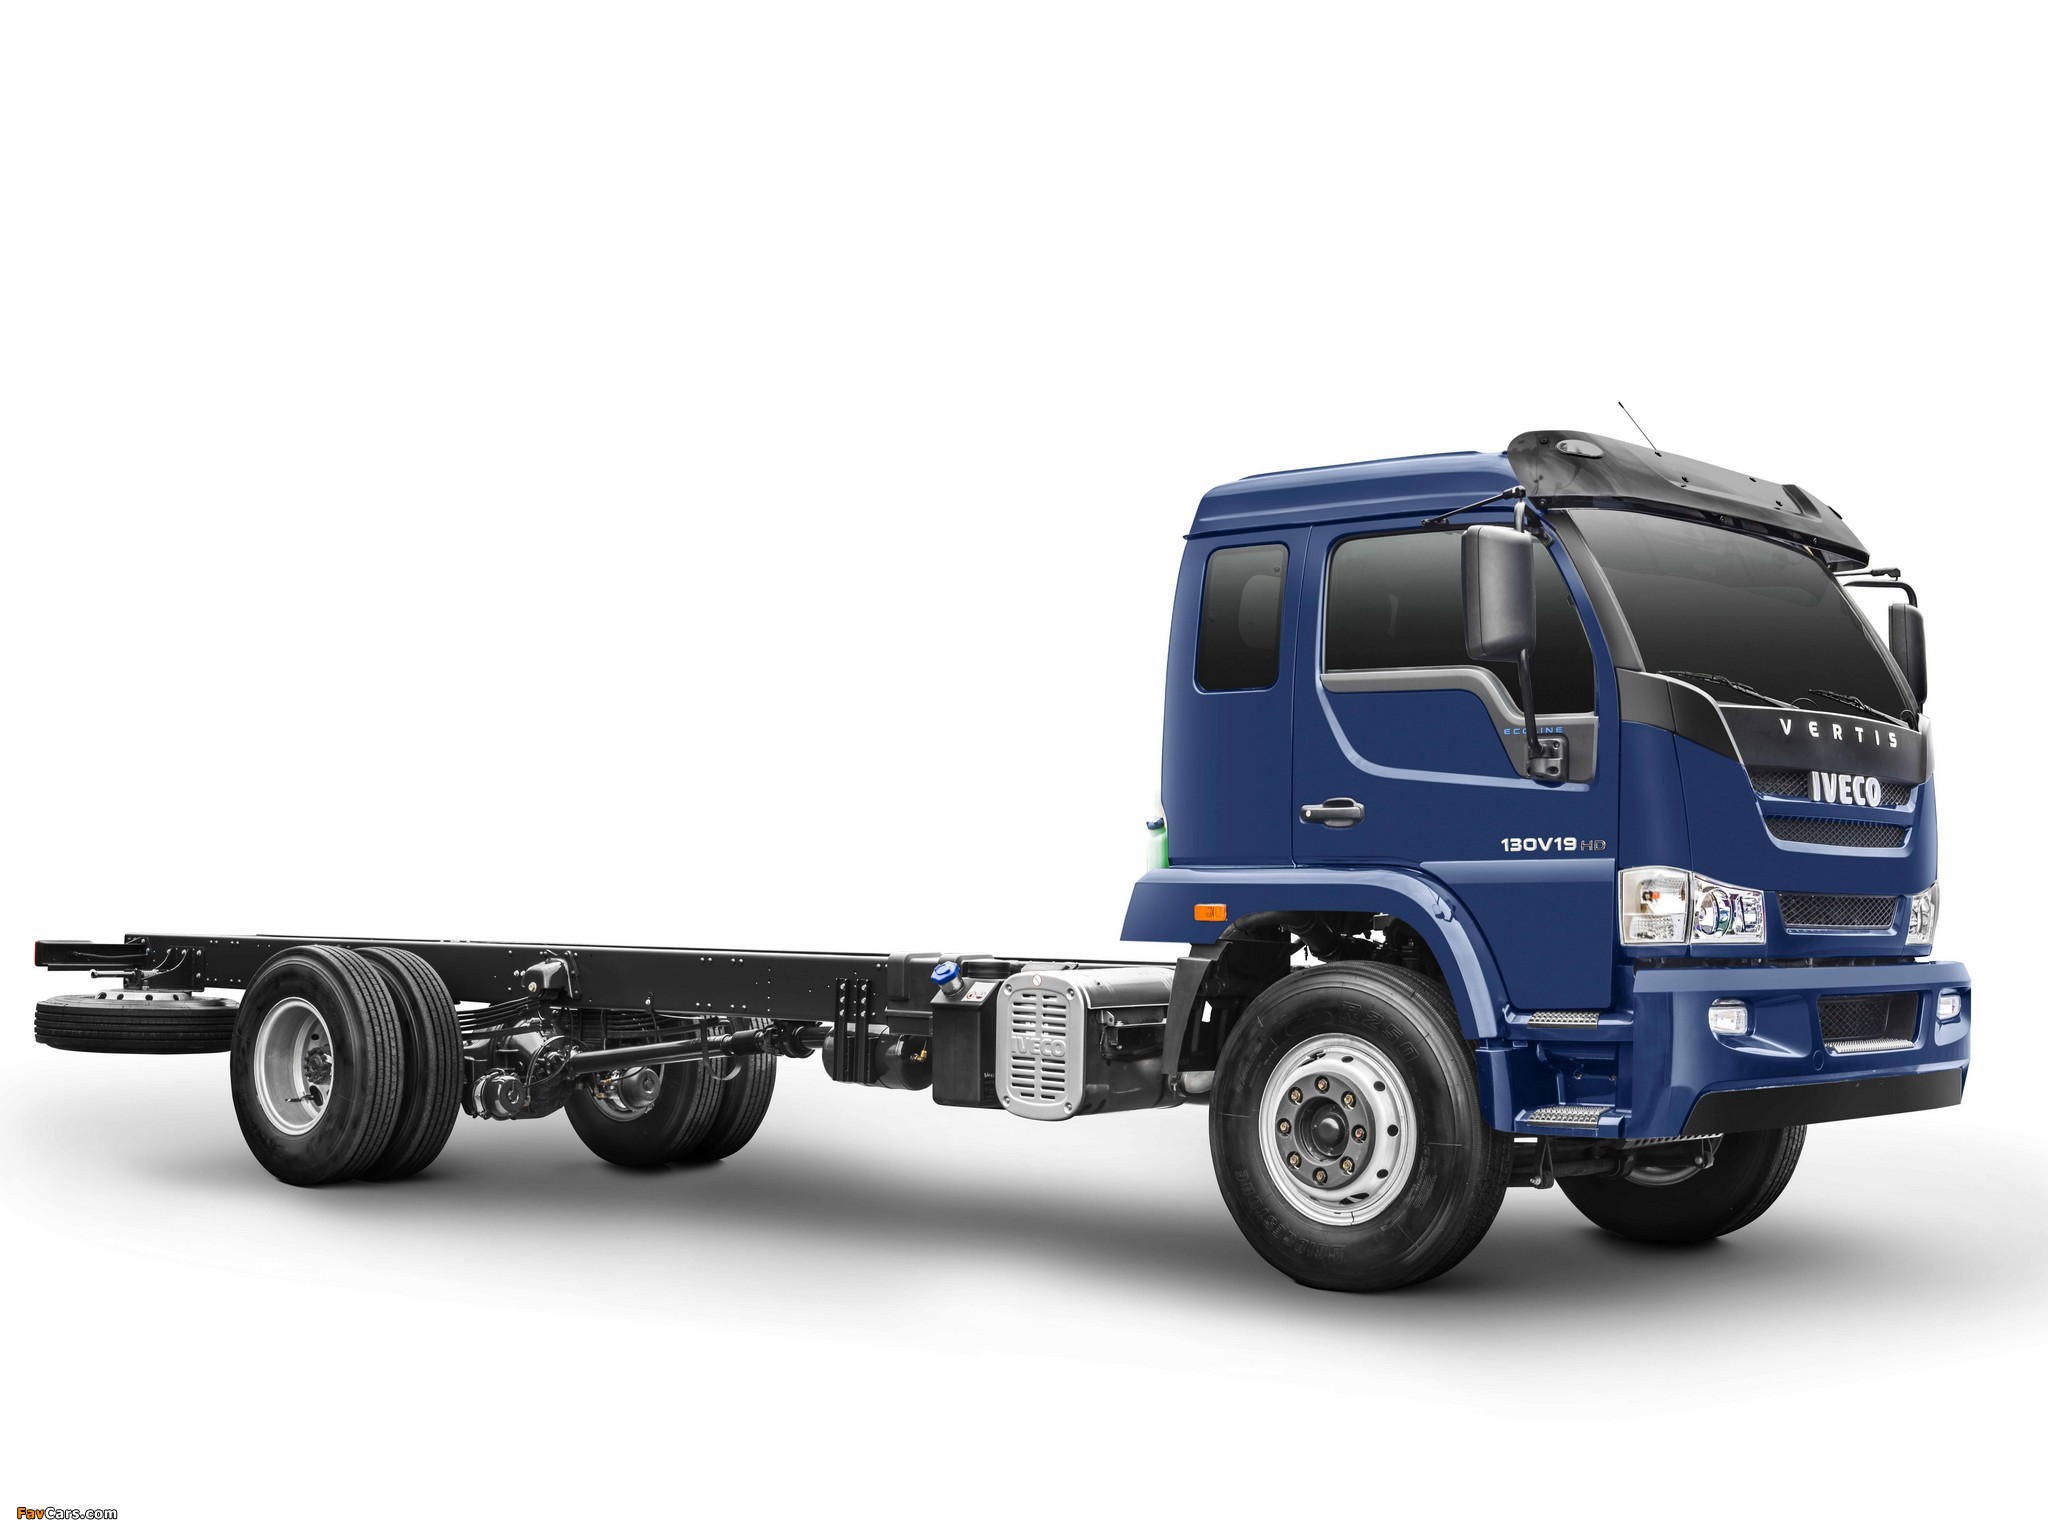 Iveco Vertis 130V 2009 wallpapers (2048 x 1536)